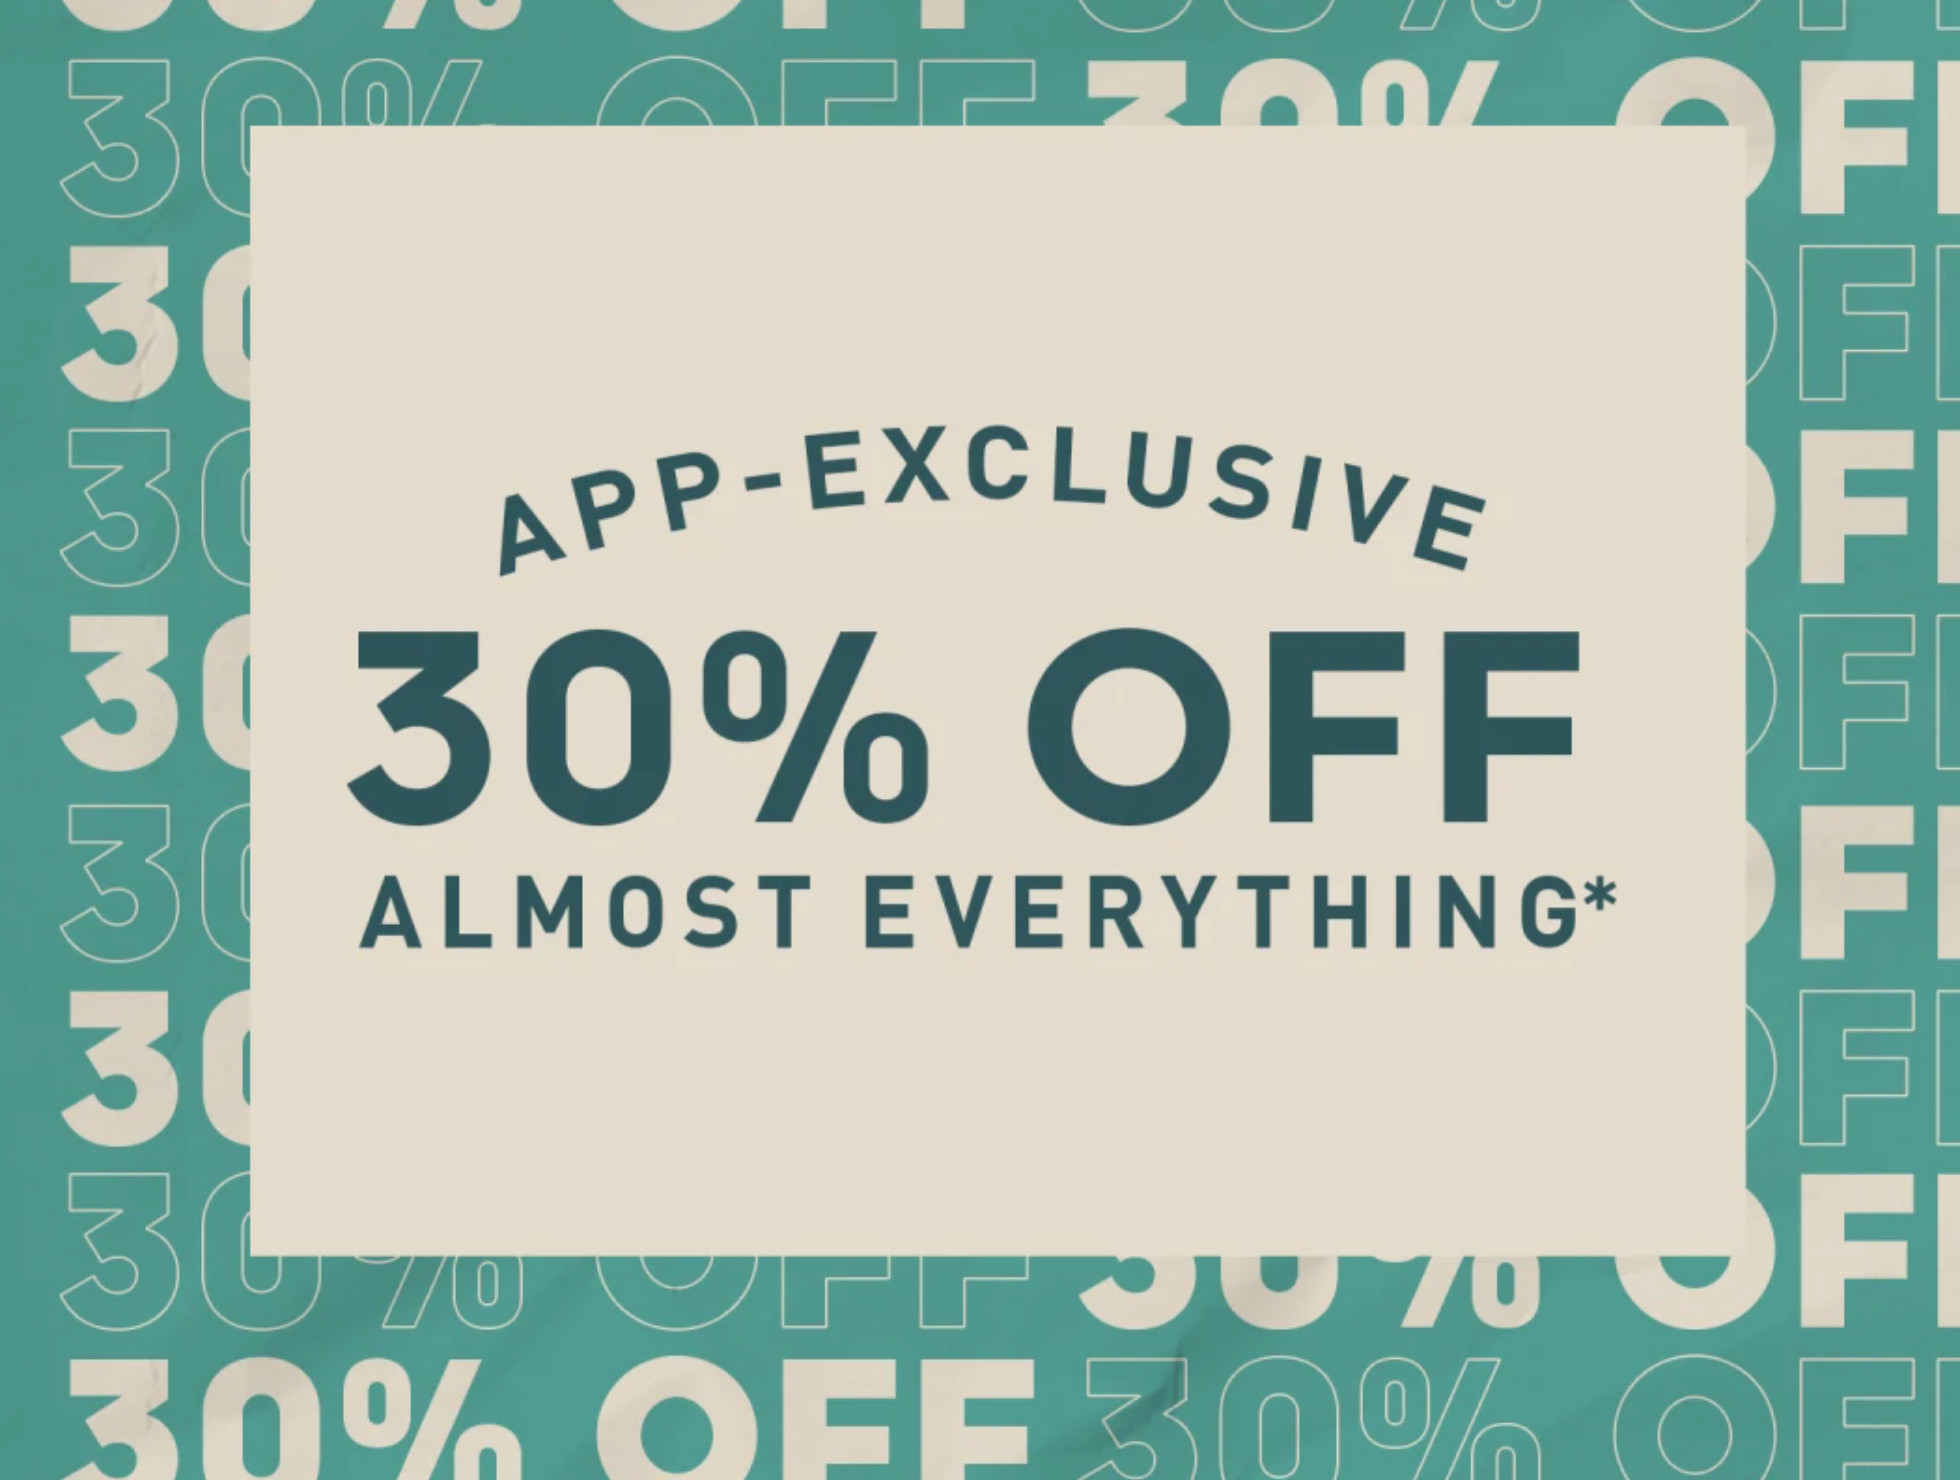 adidas: Extra 30% Off App Purchase + Free Shipping